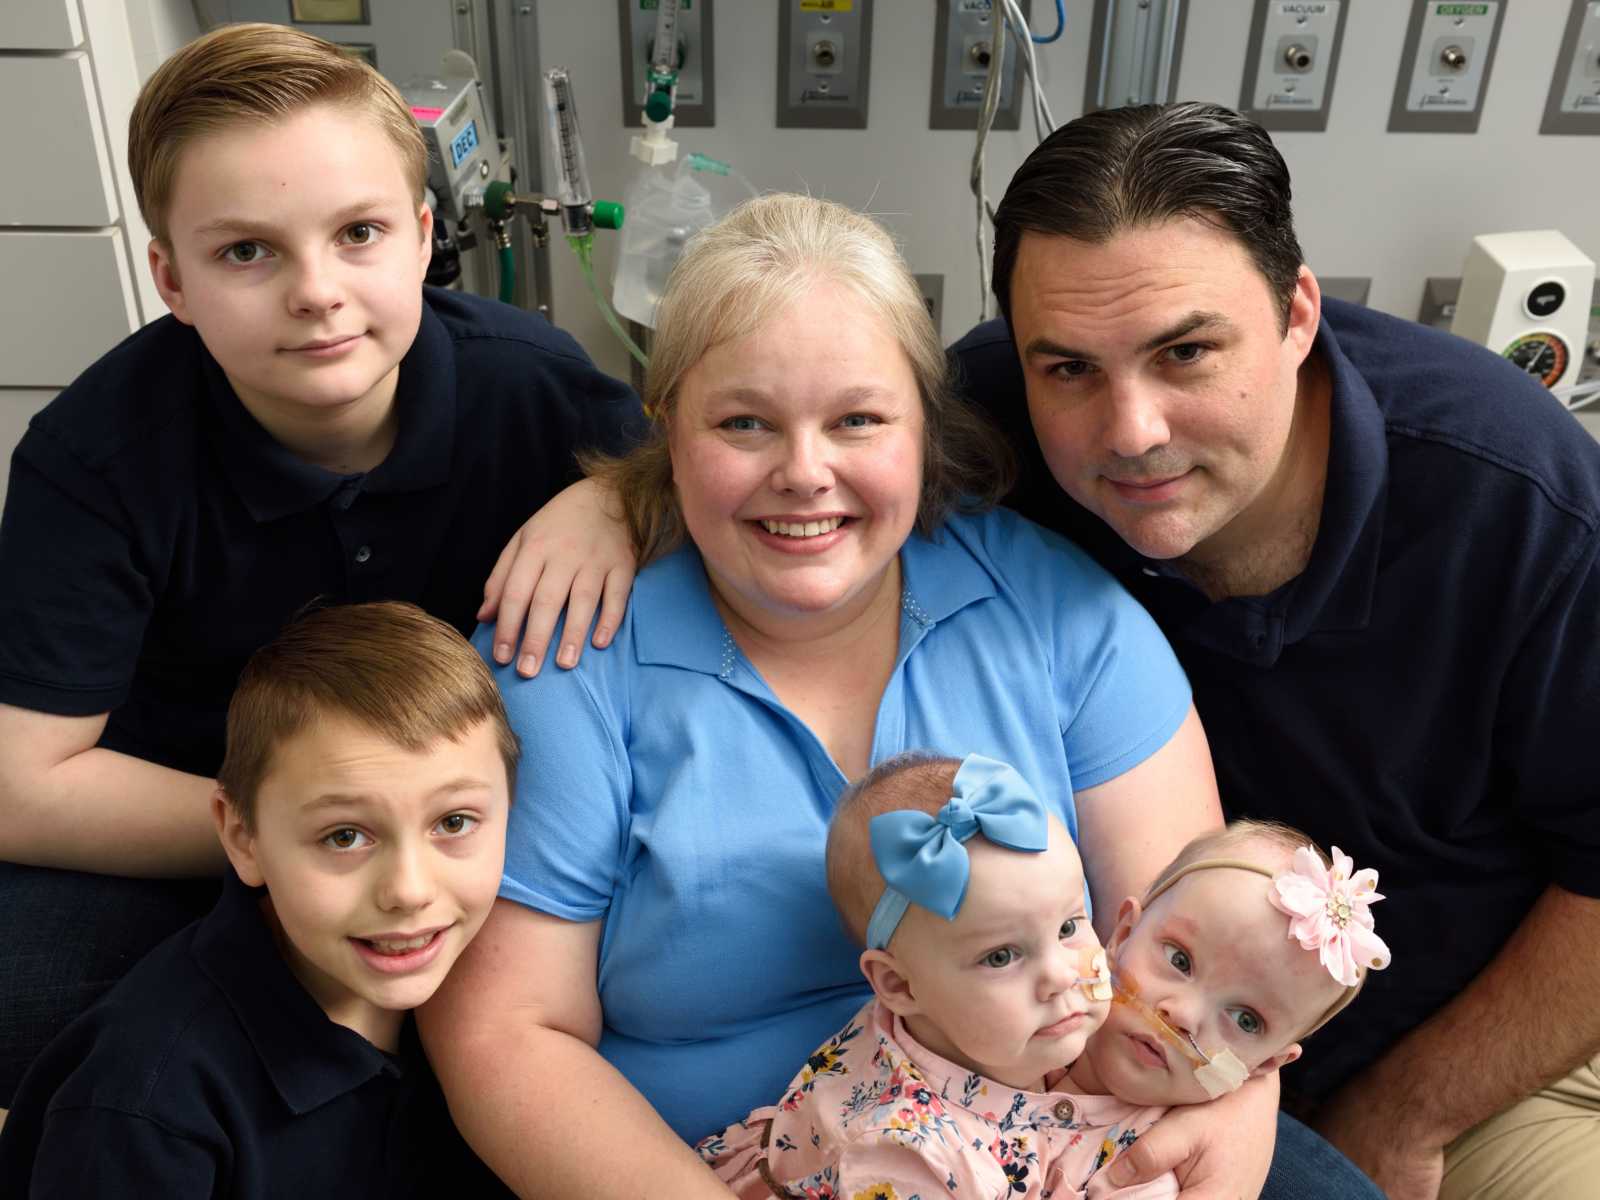 mother sits and holds conjoined baby girls in hospital with husband and other two sons at her side